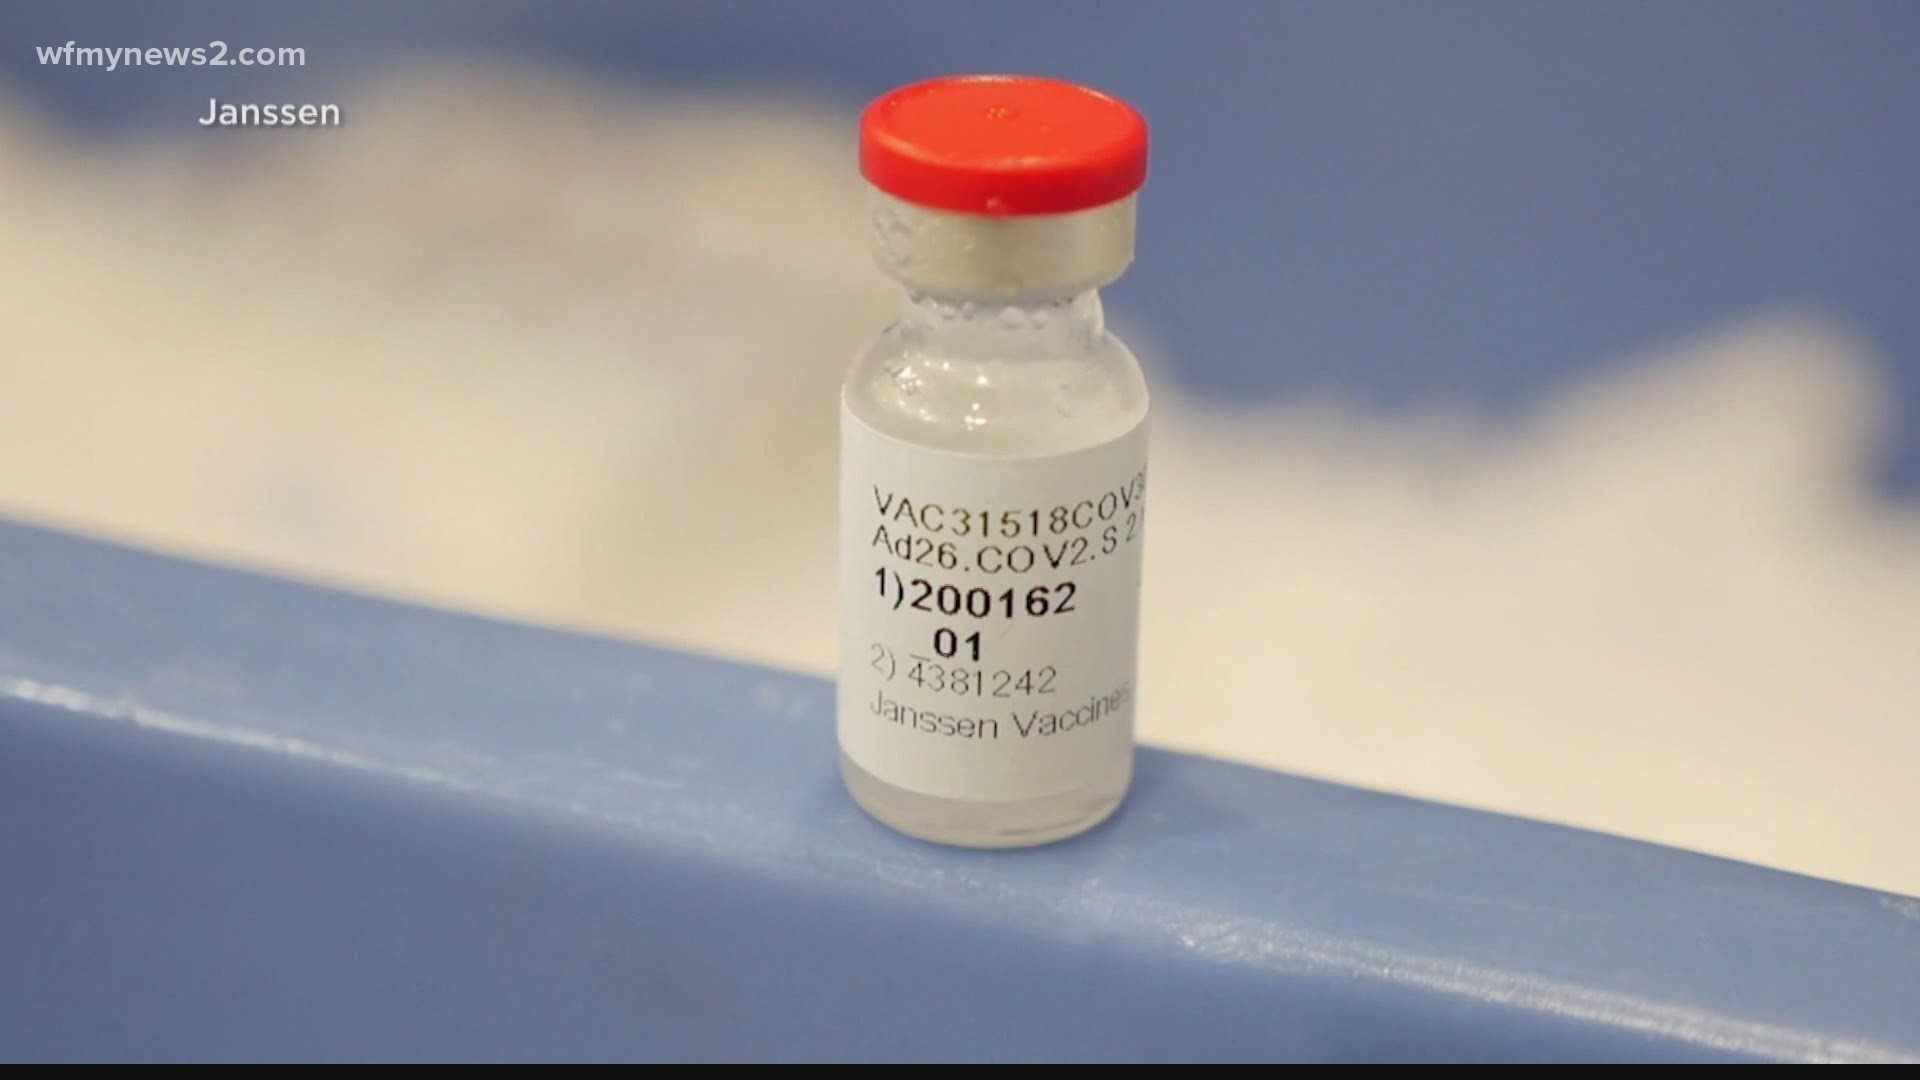 CBS News medical contributor Dr. David Agus answers the top questions about the Johnson and Johnson vaccine.